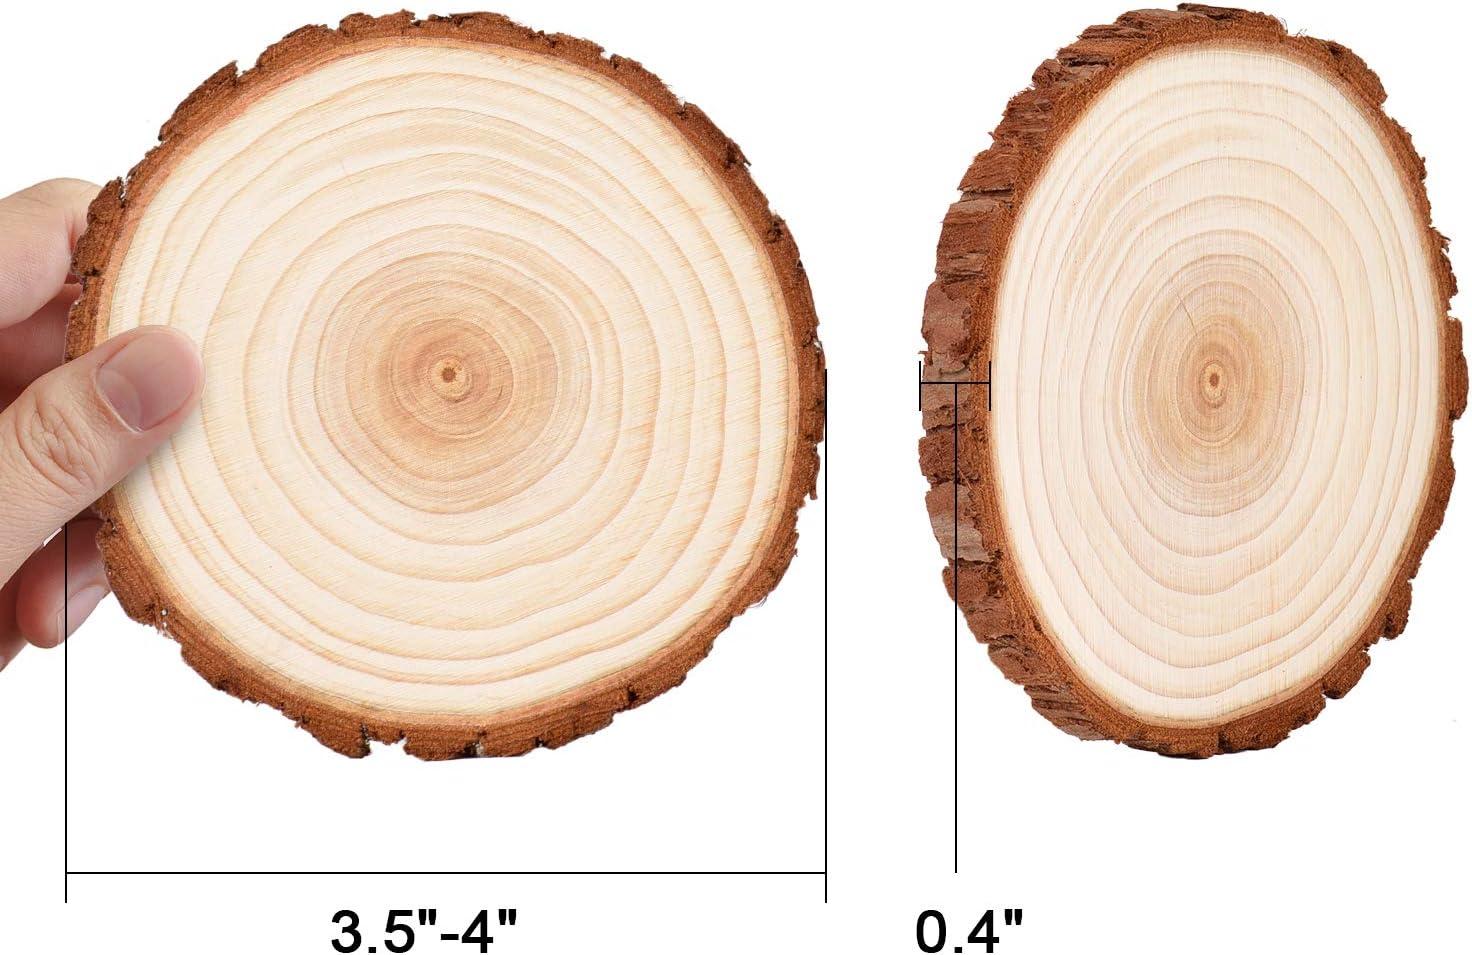 LESUMI Unfinished Natural Wood Slices with Bark - 20 Pcs 3.5-4 inch Wood  Craft kit DIY Kids Arts and Crafts Coasters Christmas Ornaments Rustic  Wedding Decorations